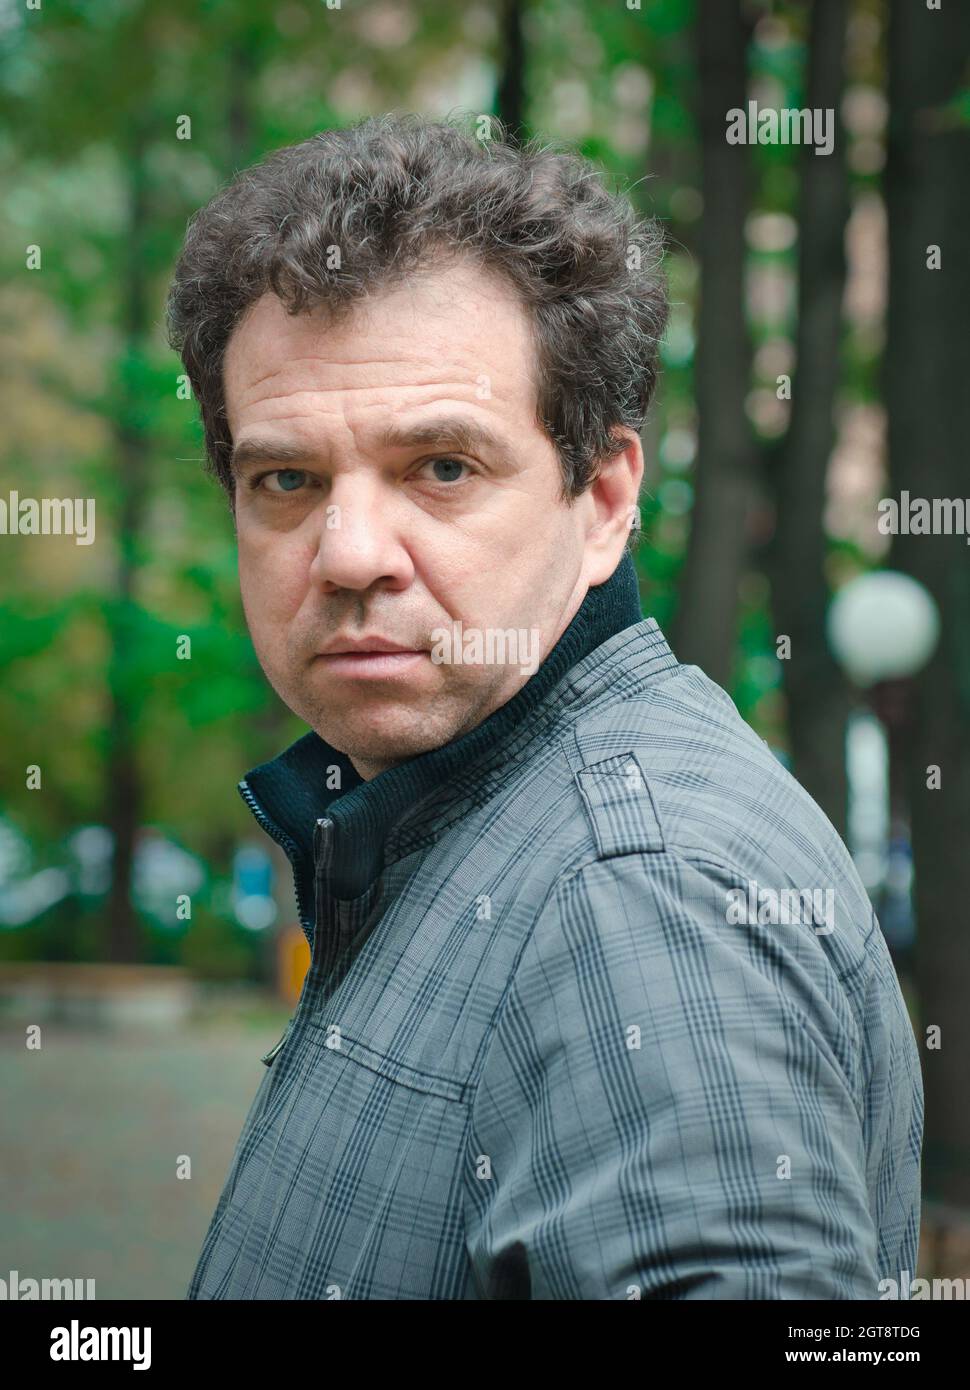 Portrait Of Man Standing Outdoors Stock Photo